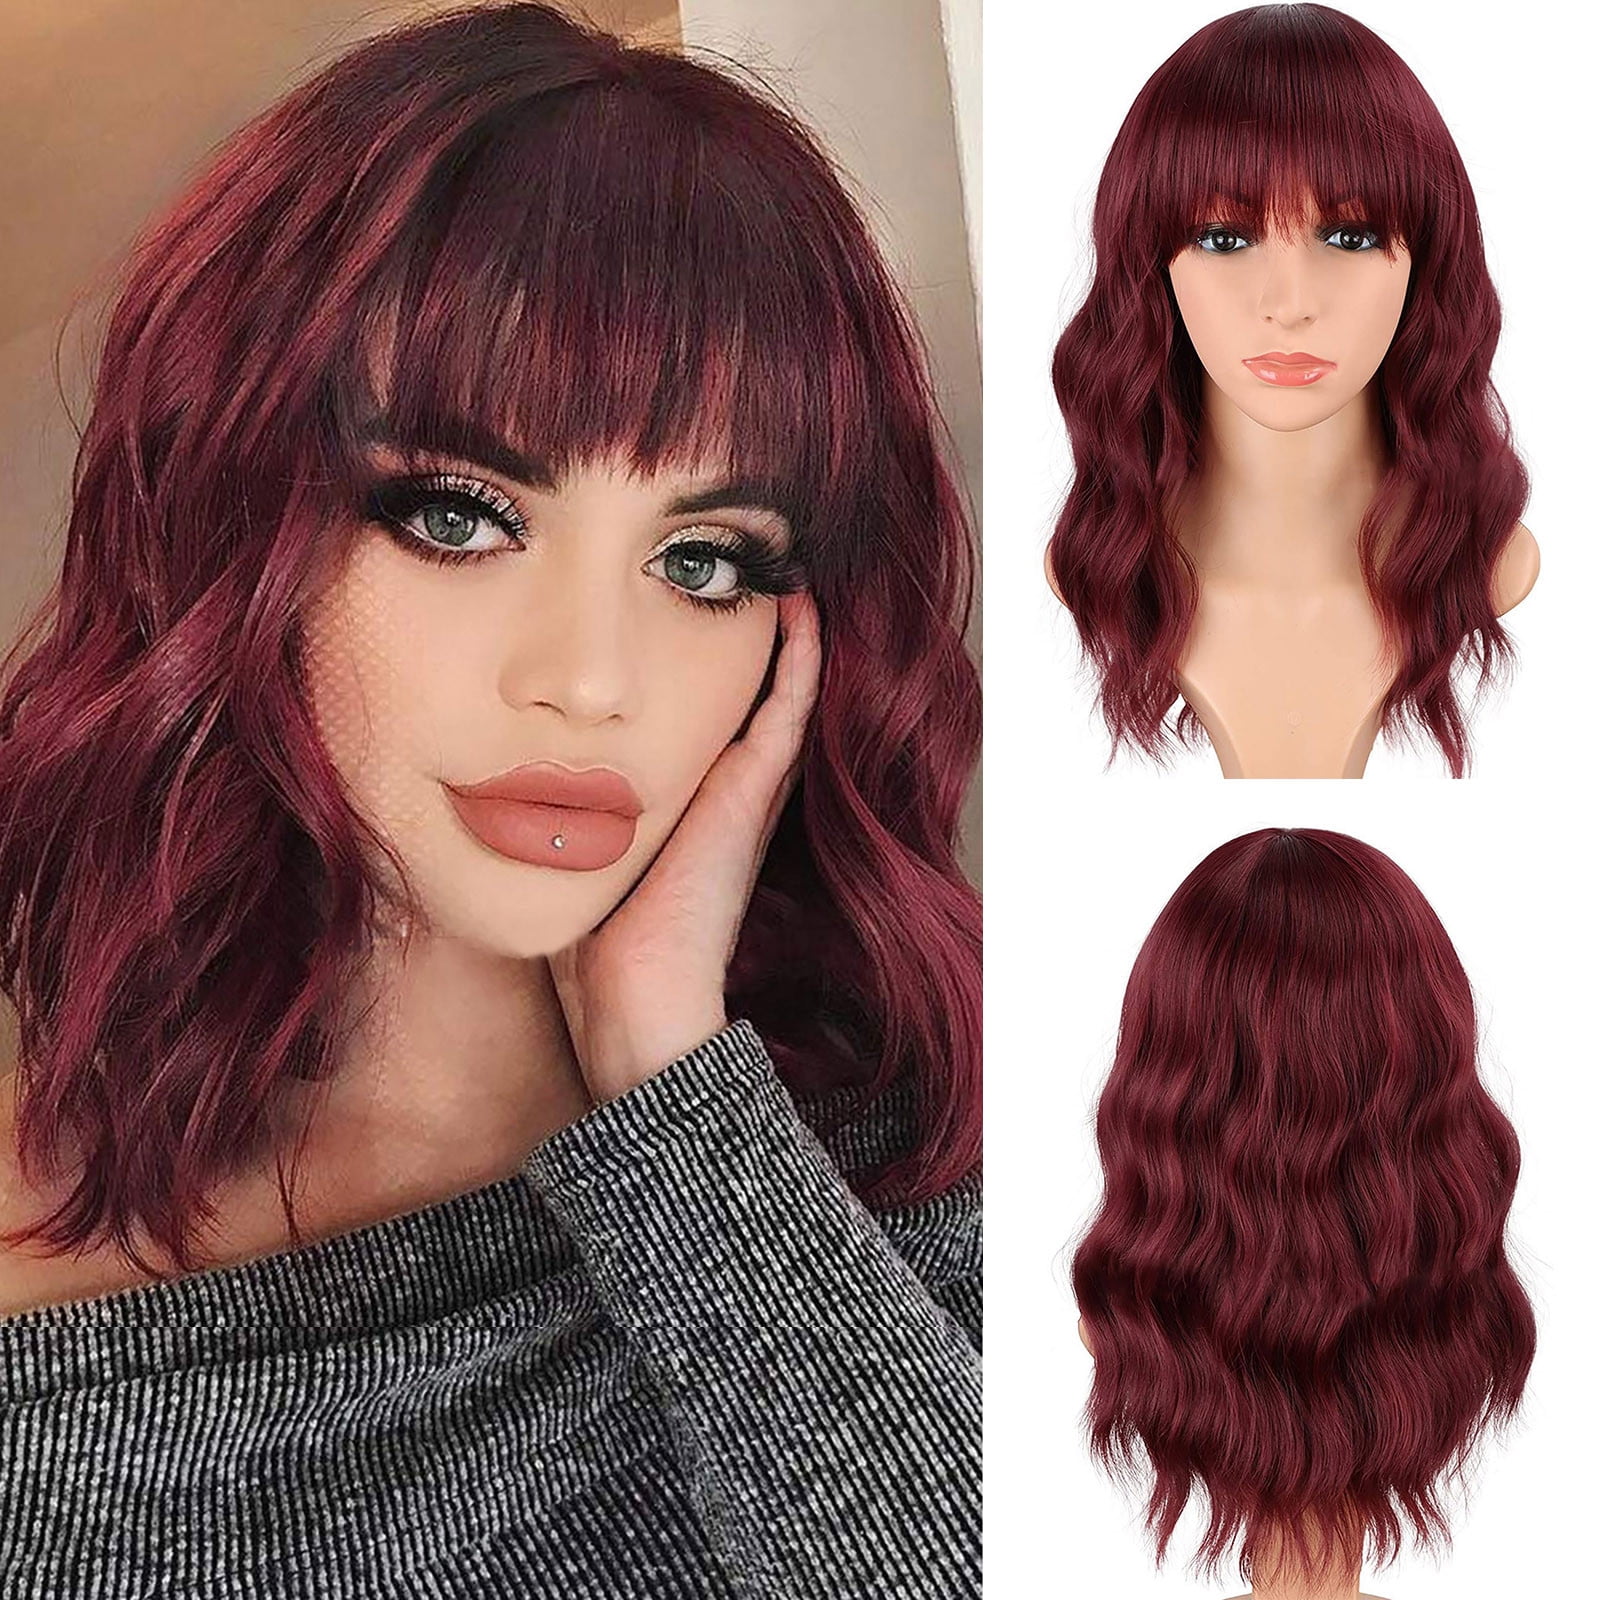 TANGNADE Human Hair Wigs For Women Black Color Natural Lace Hair Short  Curly Bangs Chemical Fiber Wig Bright Red Cos Headgear 